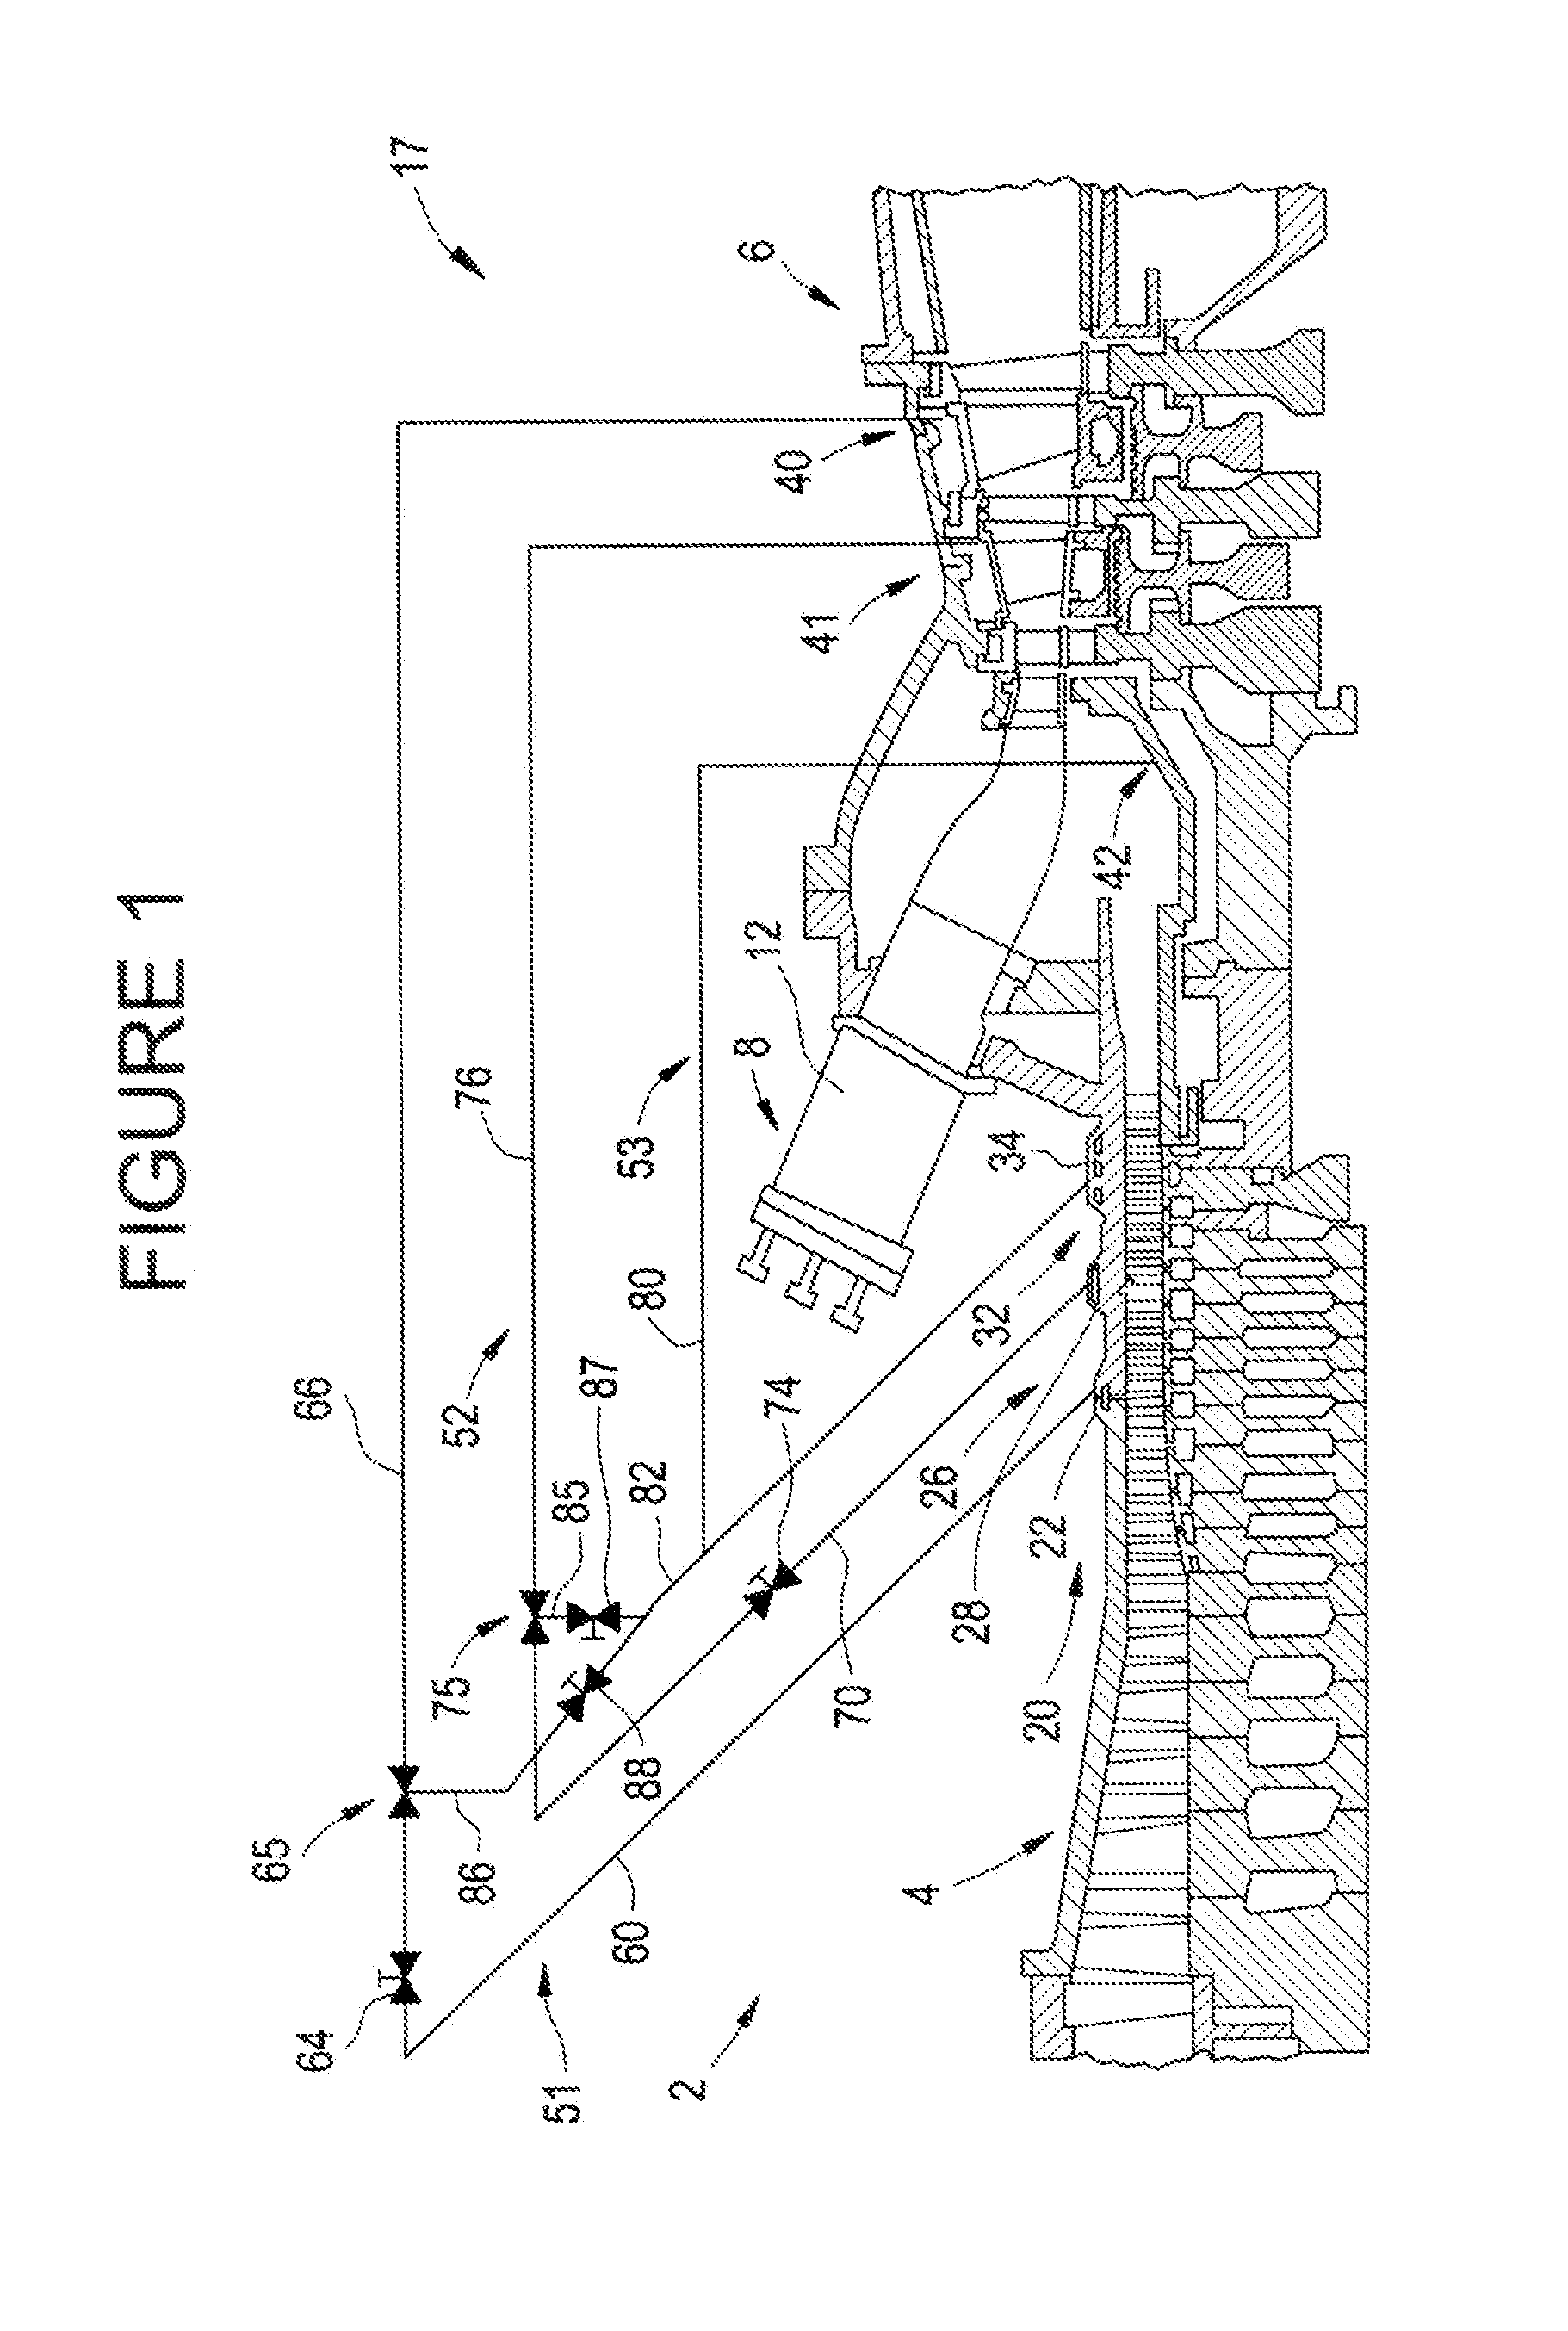 System for delivering air from a multi-stage compressor to a turbine portion of a gas turbine engine